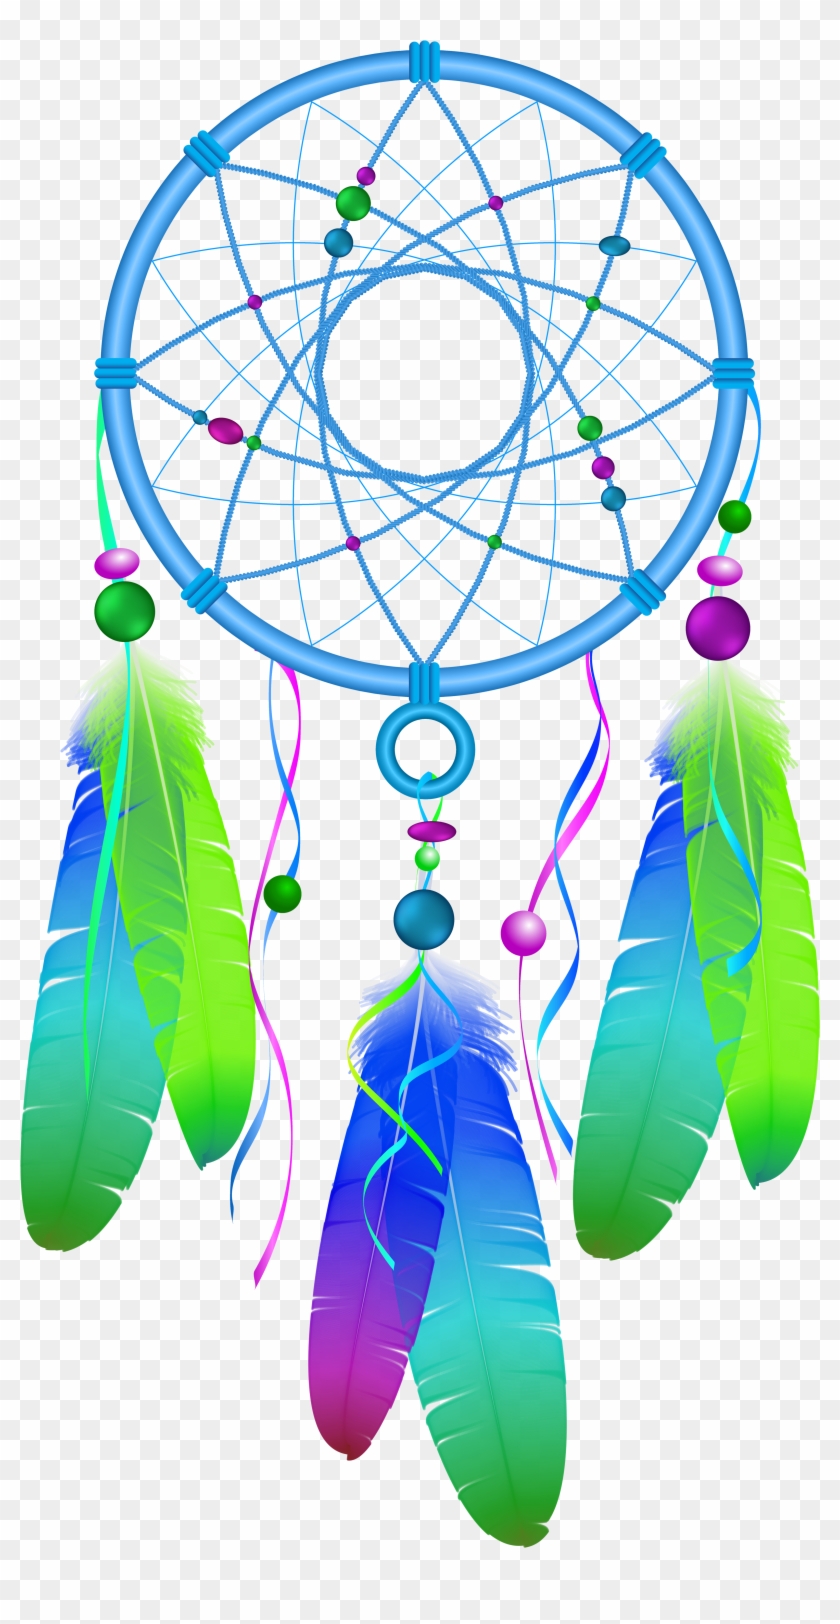 Free dream catchers, Download Free dream catchers png images, Free ...